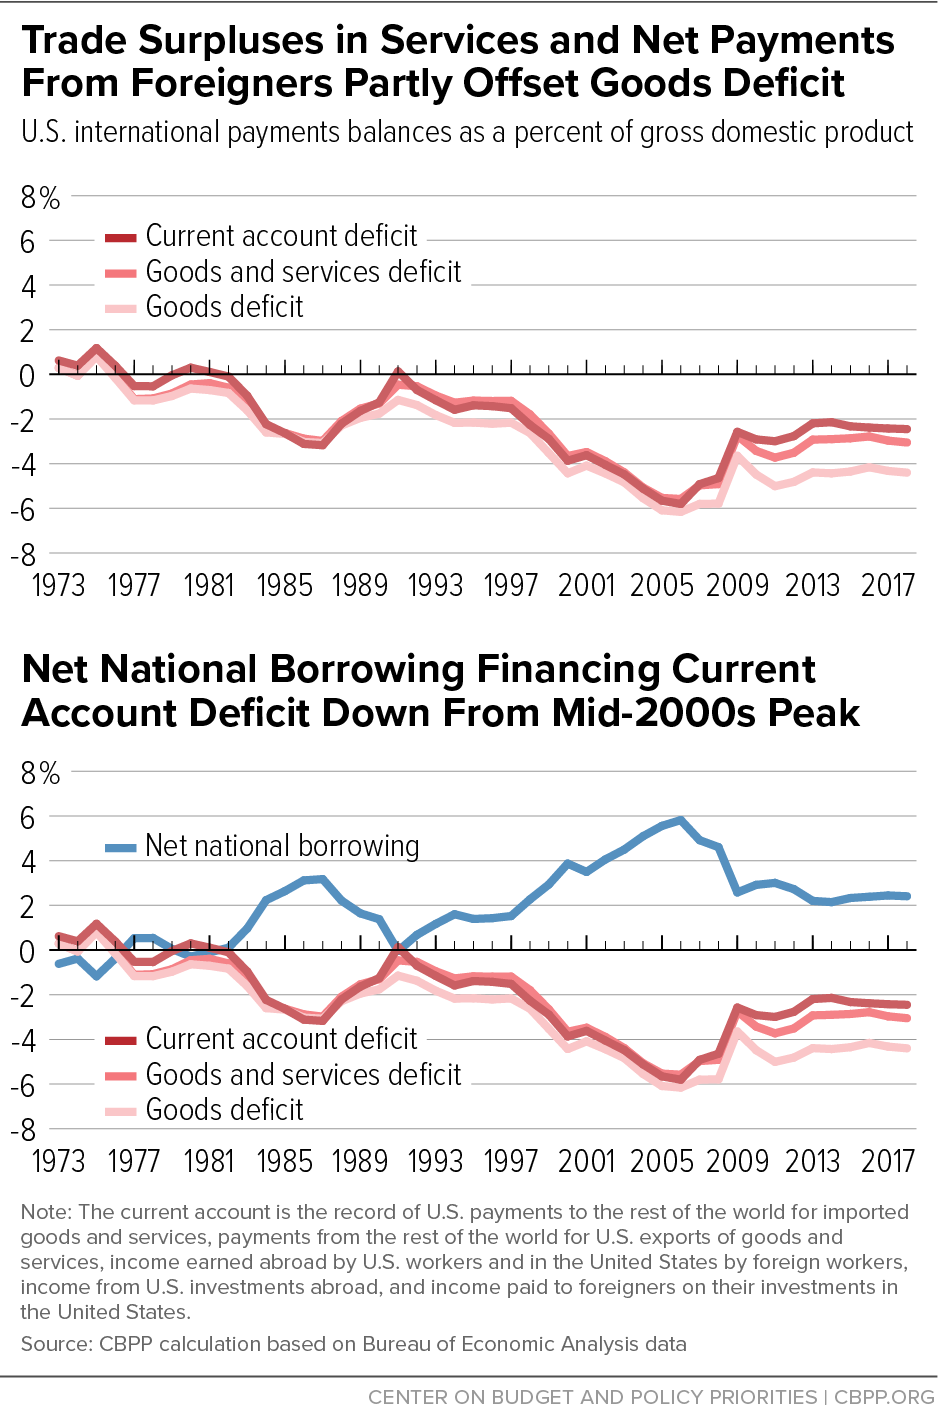 Trade Surpluses in Services and Net Payments From Foreigners Partly Offset Goods Deficit; Net National Borrowing Financing Current Account Deficit Down From Mid-2000s Peak